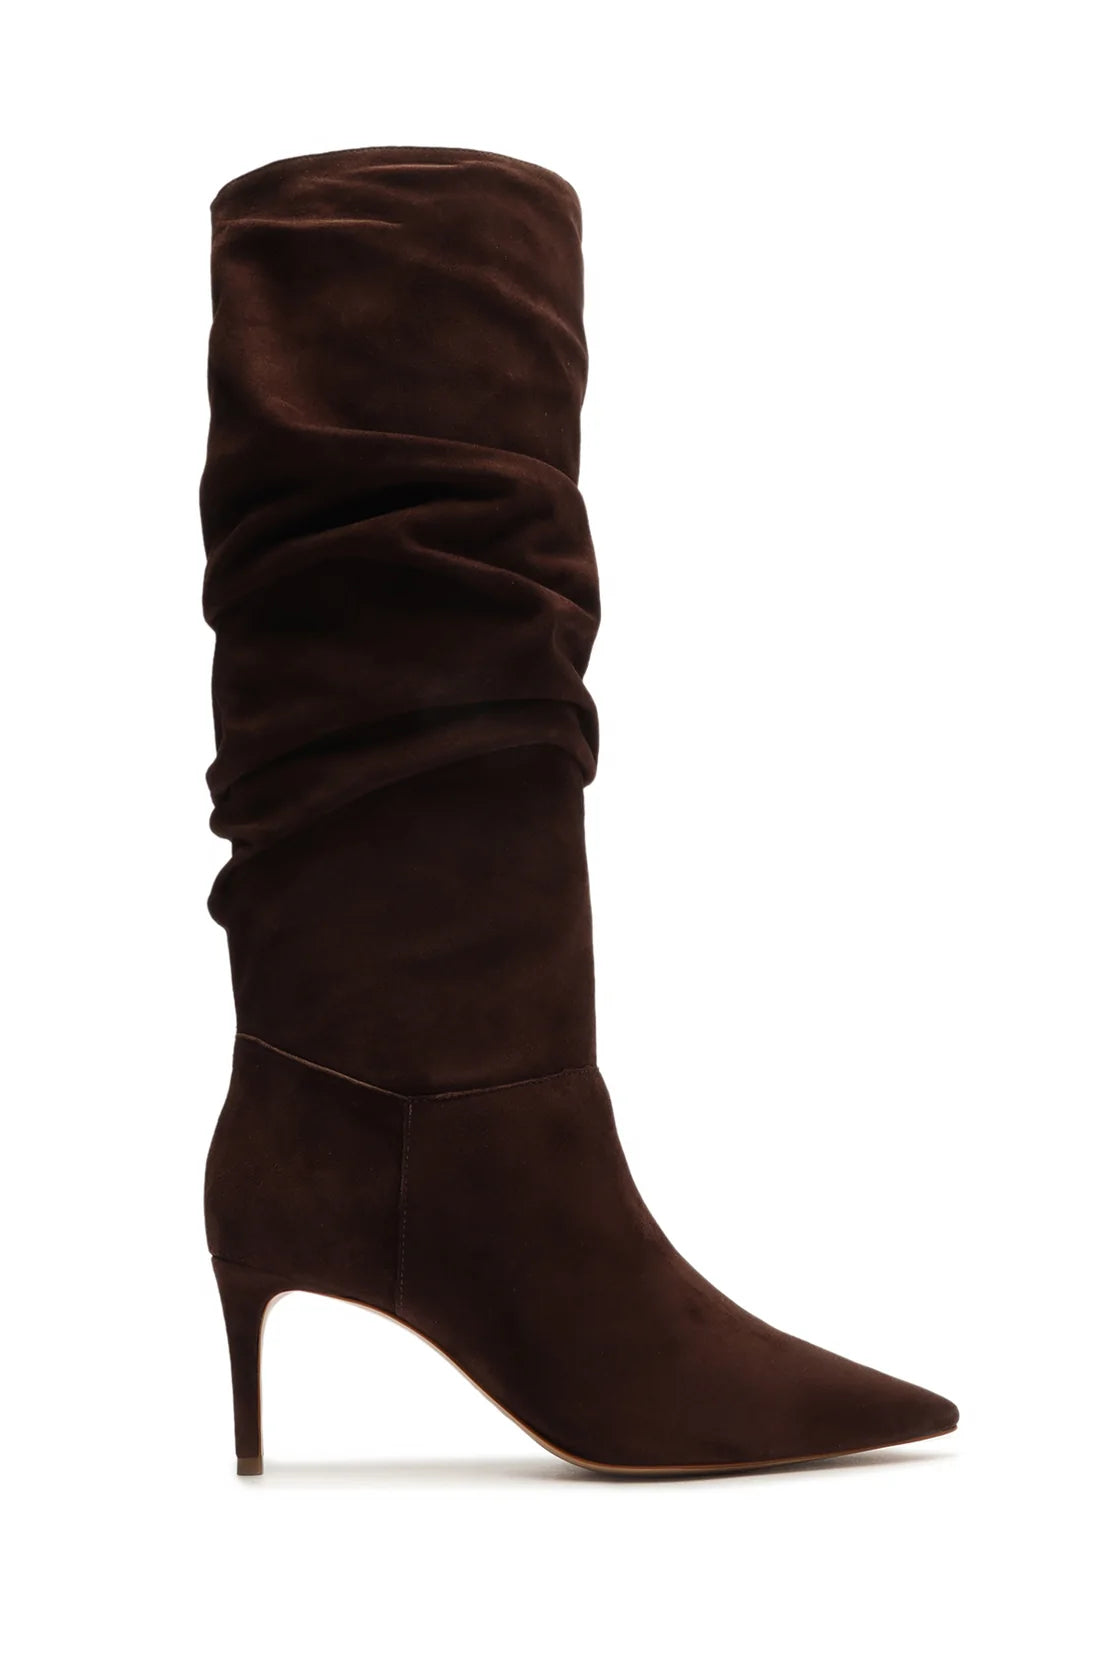 Ashlee Up Suede Boot